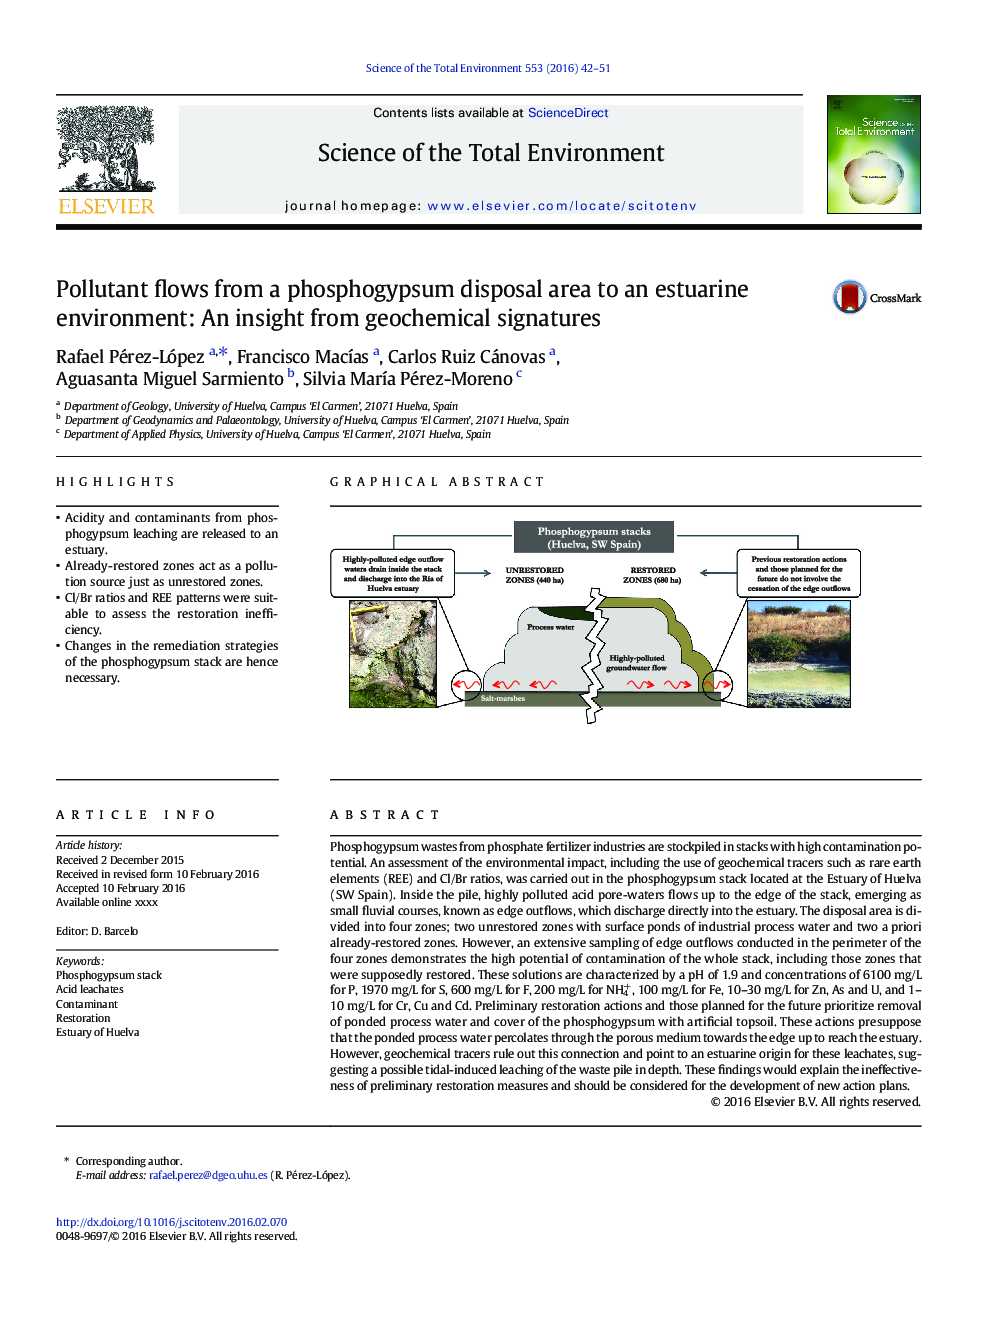 Pollutant flows from a phosphogypsum disposal area to an estuarine environment: An insight from geochemical signatures